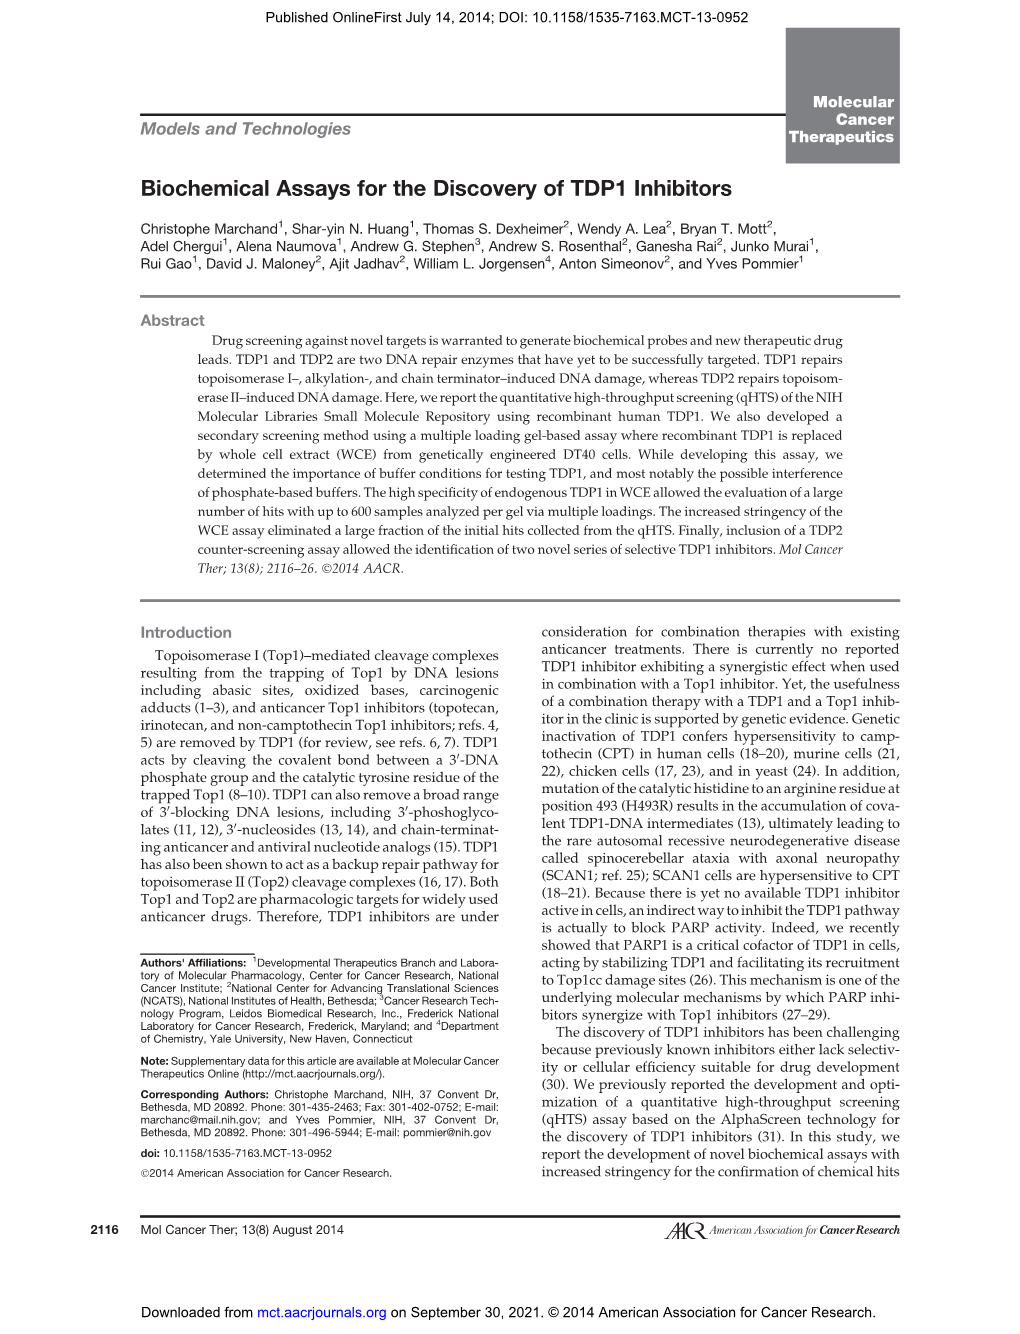 Biochemical Assays for the Discovery of TDP1 Inhibitors